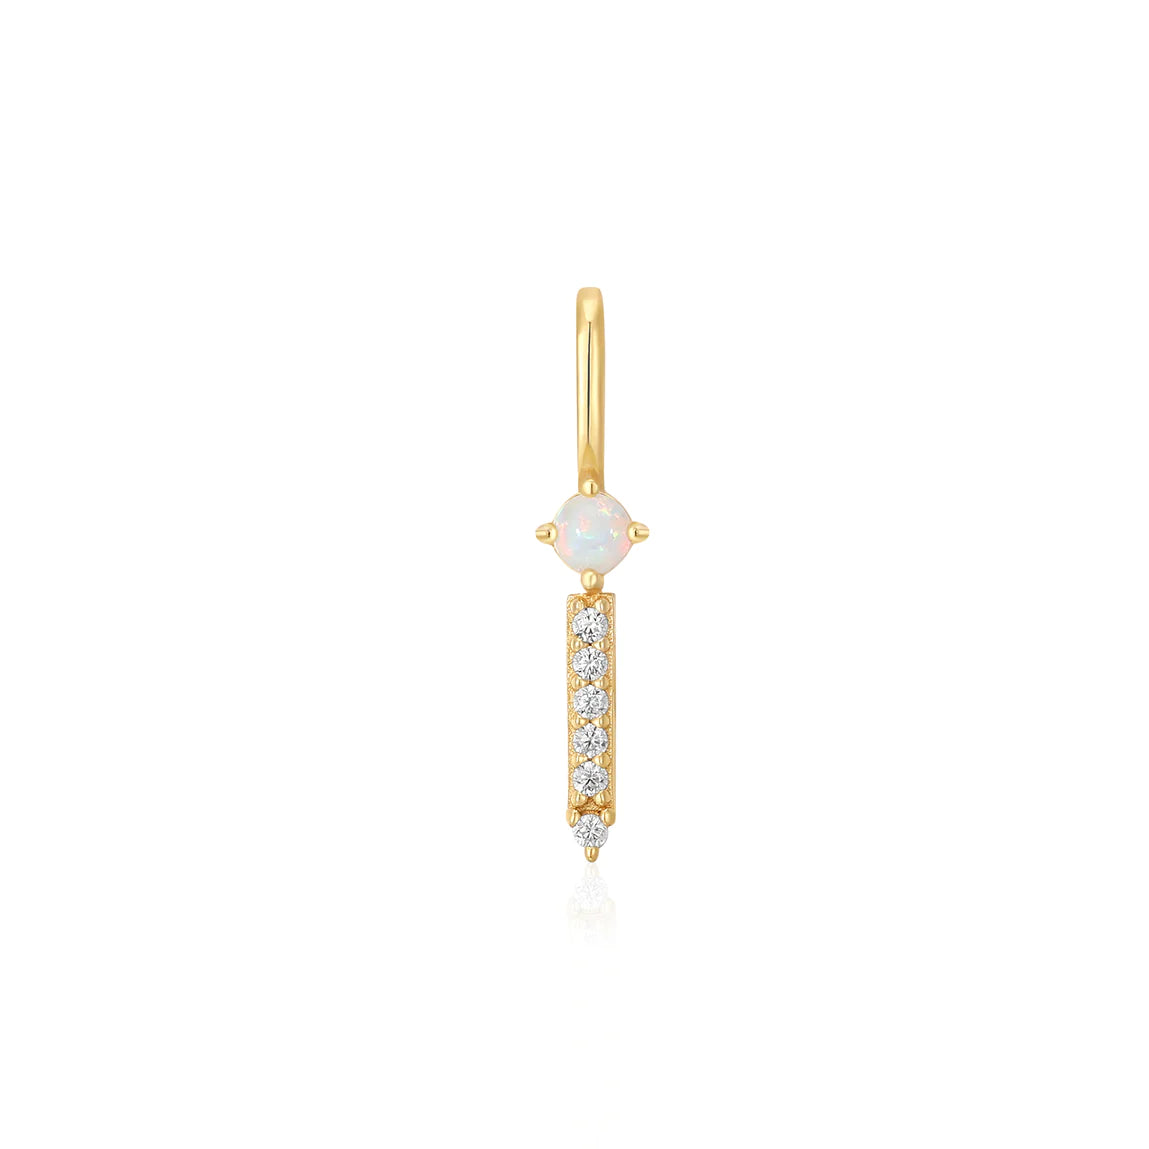 Ania Haie - POP CHARMS Bedel voor Armband of ketting - Kyoto Opal Sparkle Bar